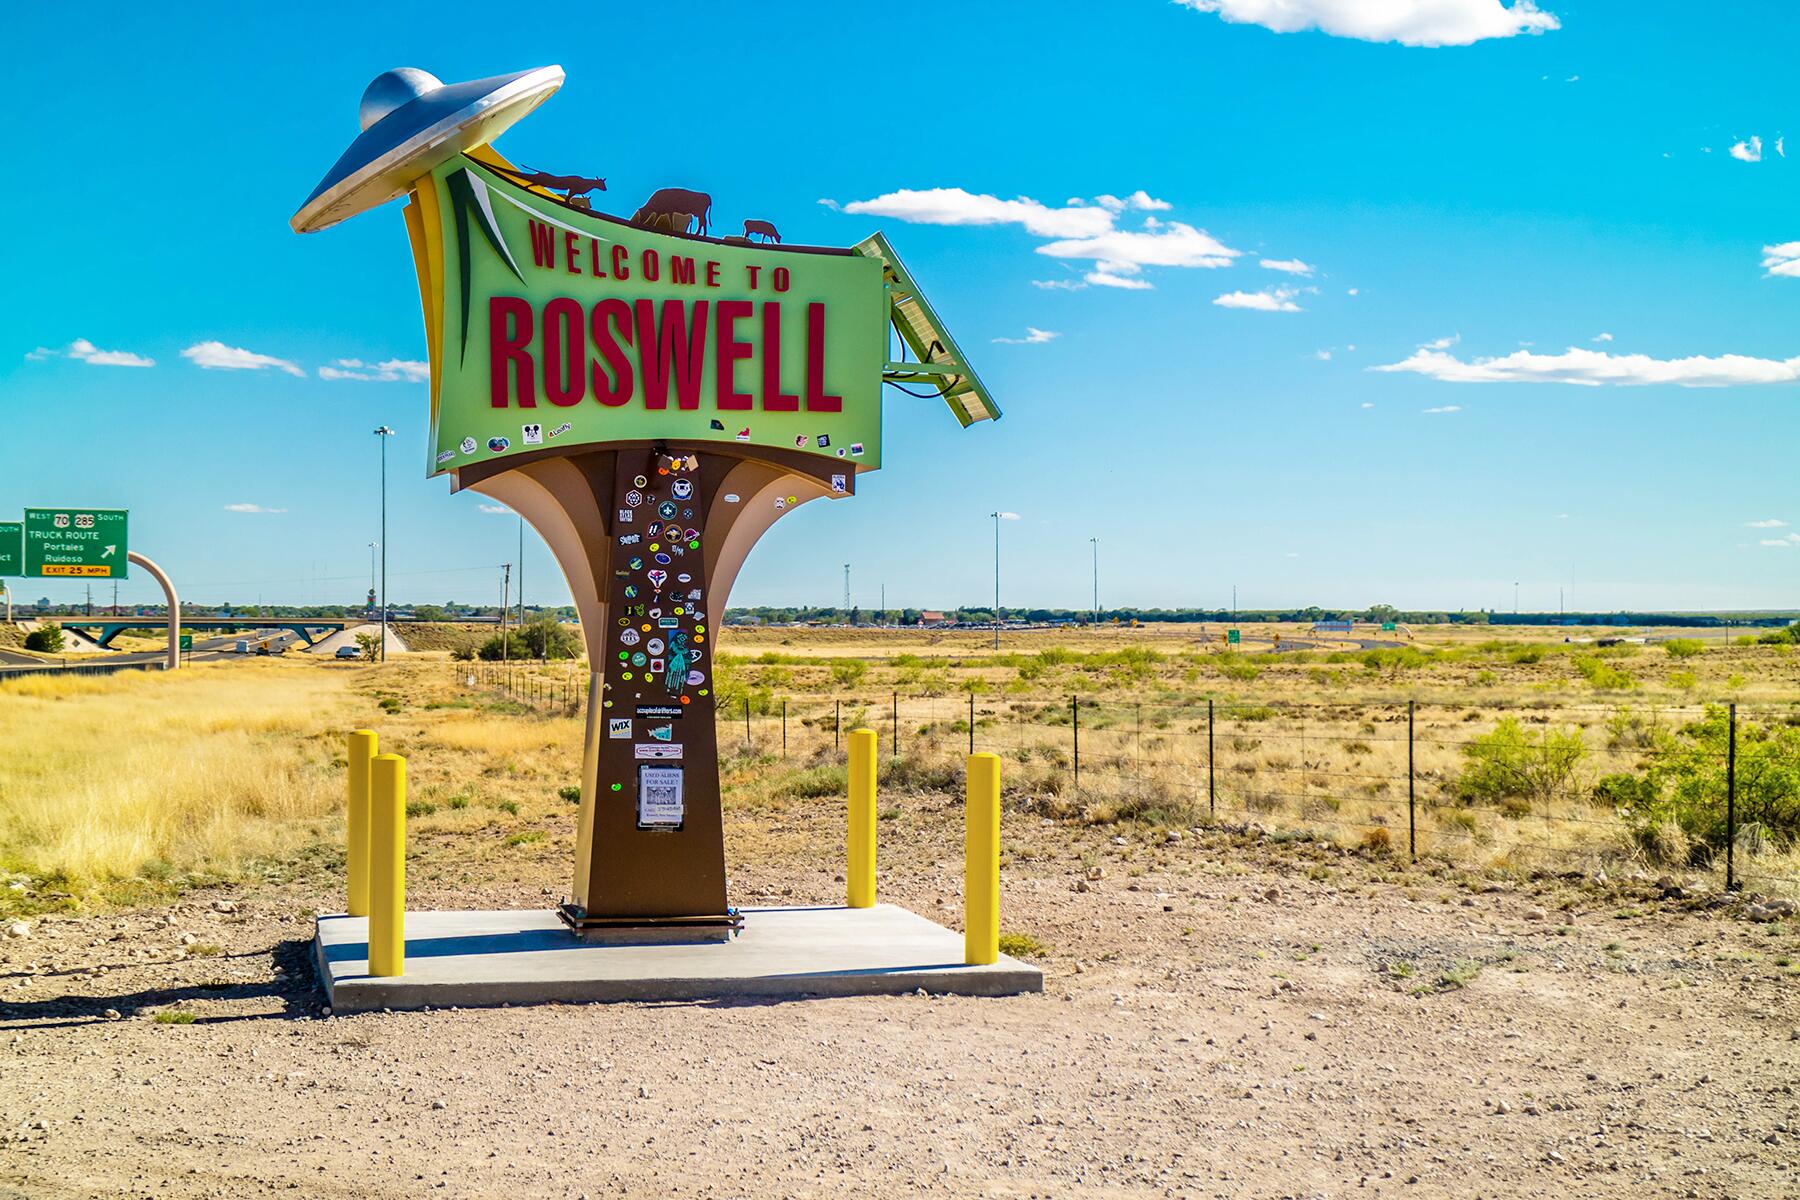 Albuquerque to Roswell, New Mexico